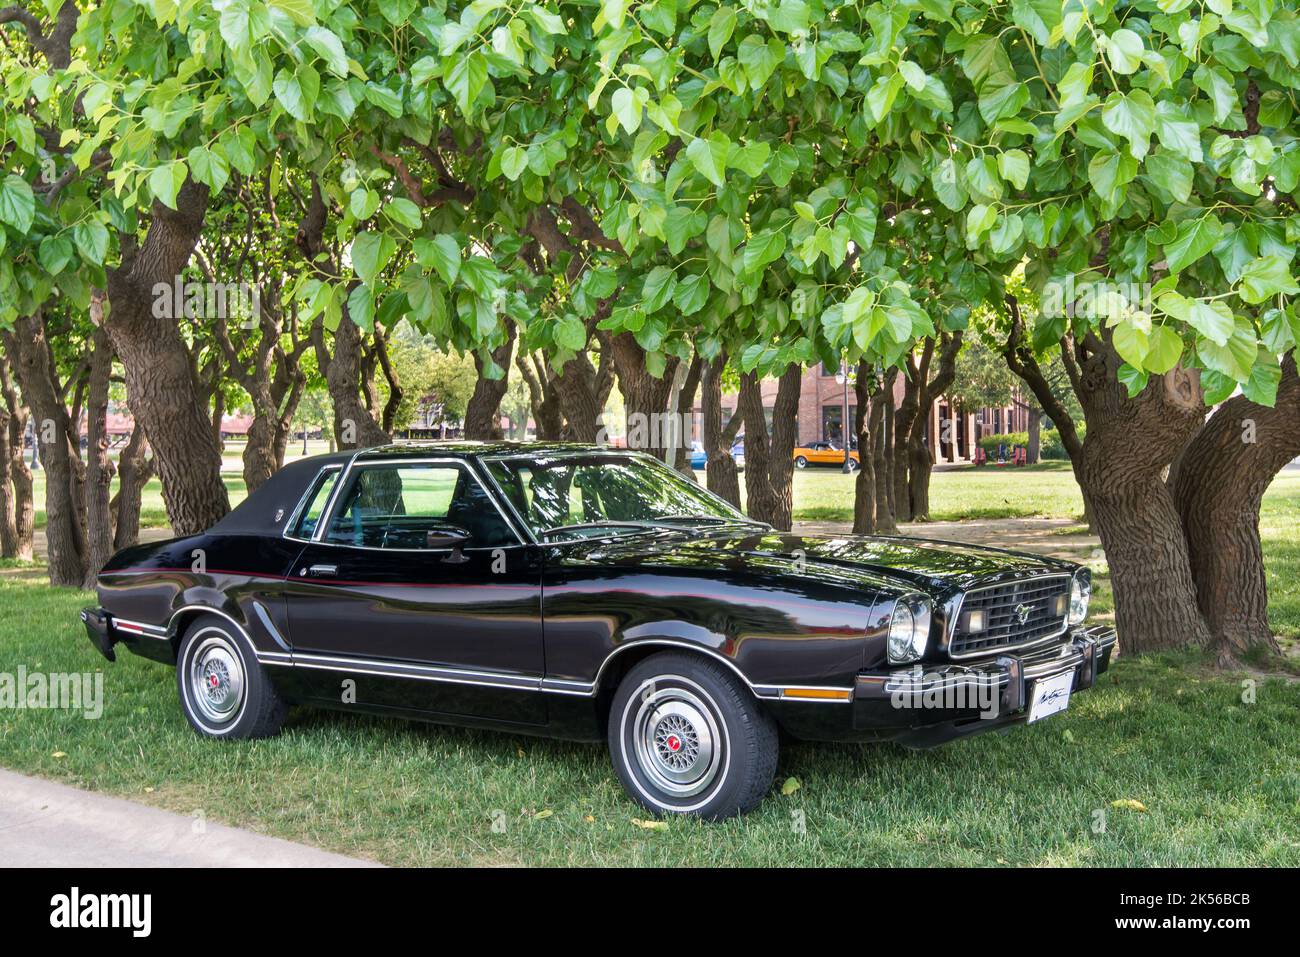 DEARBORN, MI/USA - JUNE 17, 2017: A 1977 Ford Mustang II car at The Henry Ford (THF) Motor Muster car show, Greenfield Village, near Detroit, Michigan Stock Photo